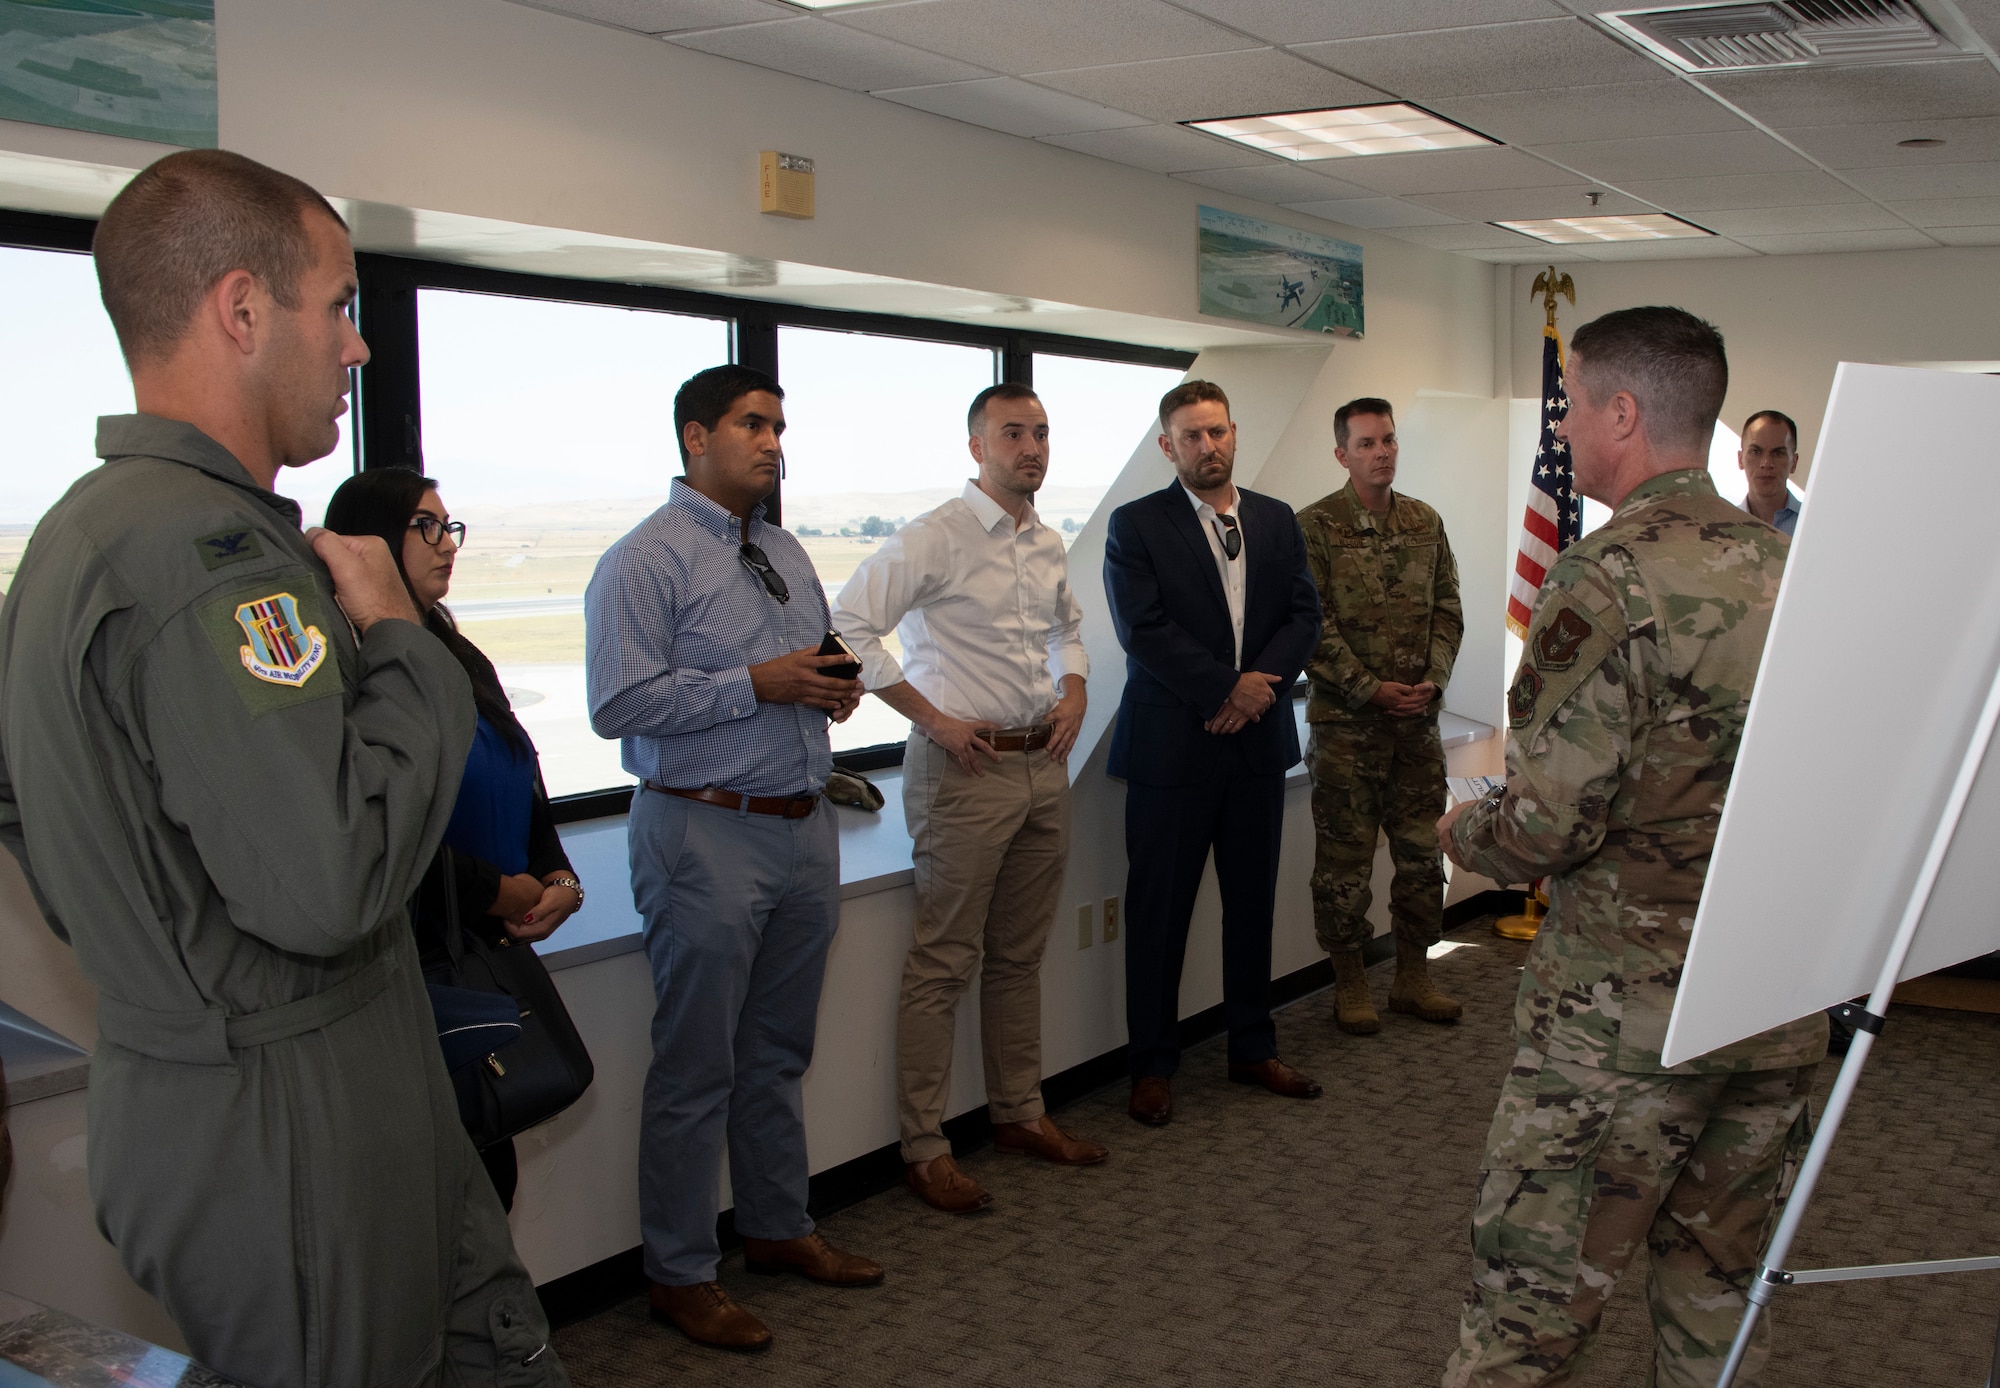 U.S. Air Force Senior Master Sgt. Keith Bennett, right, KC-46 Program Integration Office superintendent, briefs during a tour, Aug. 13, 2019 at the control tower, Travis Air Force Base, California.  Representatives for California Senators Diane Feinstein and Kamala Harris visited Travis AFB to gain better knowledge of the mission and discuss the strategic importance of the base. (U.S. Air Force photo by Heide Couch)